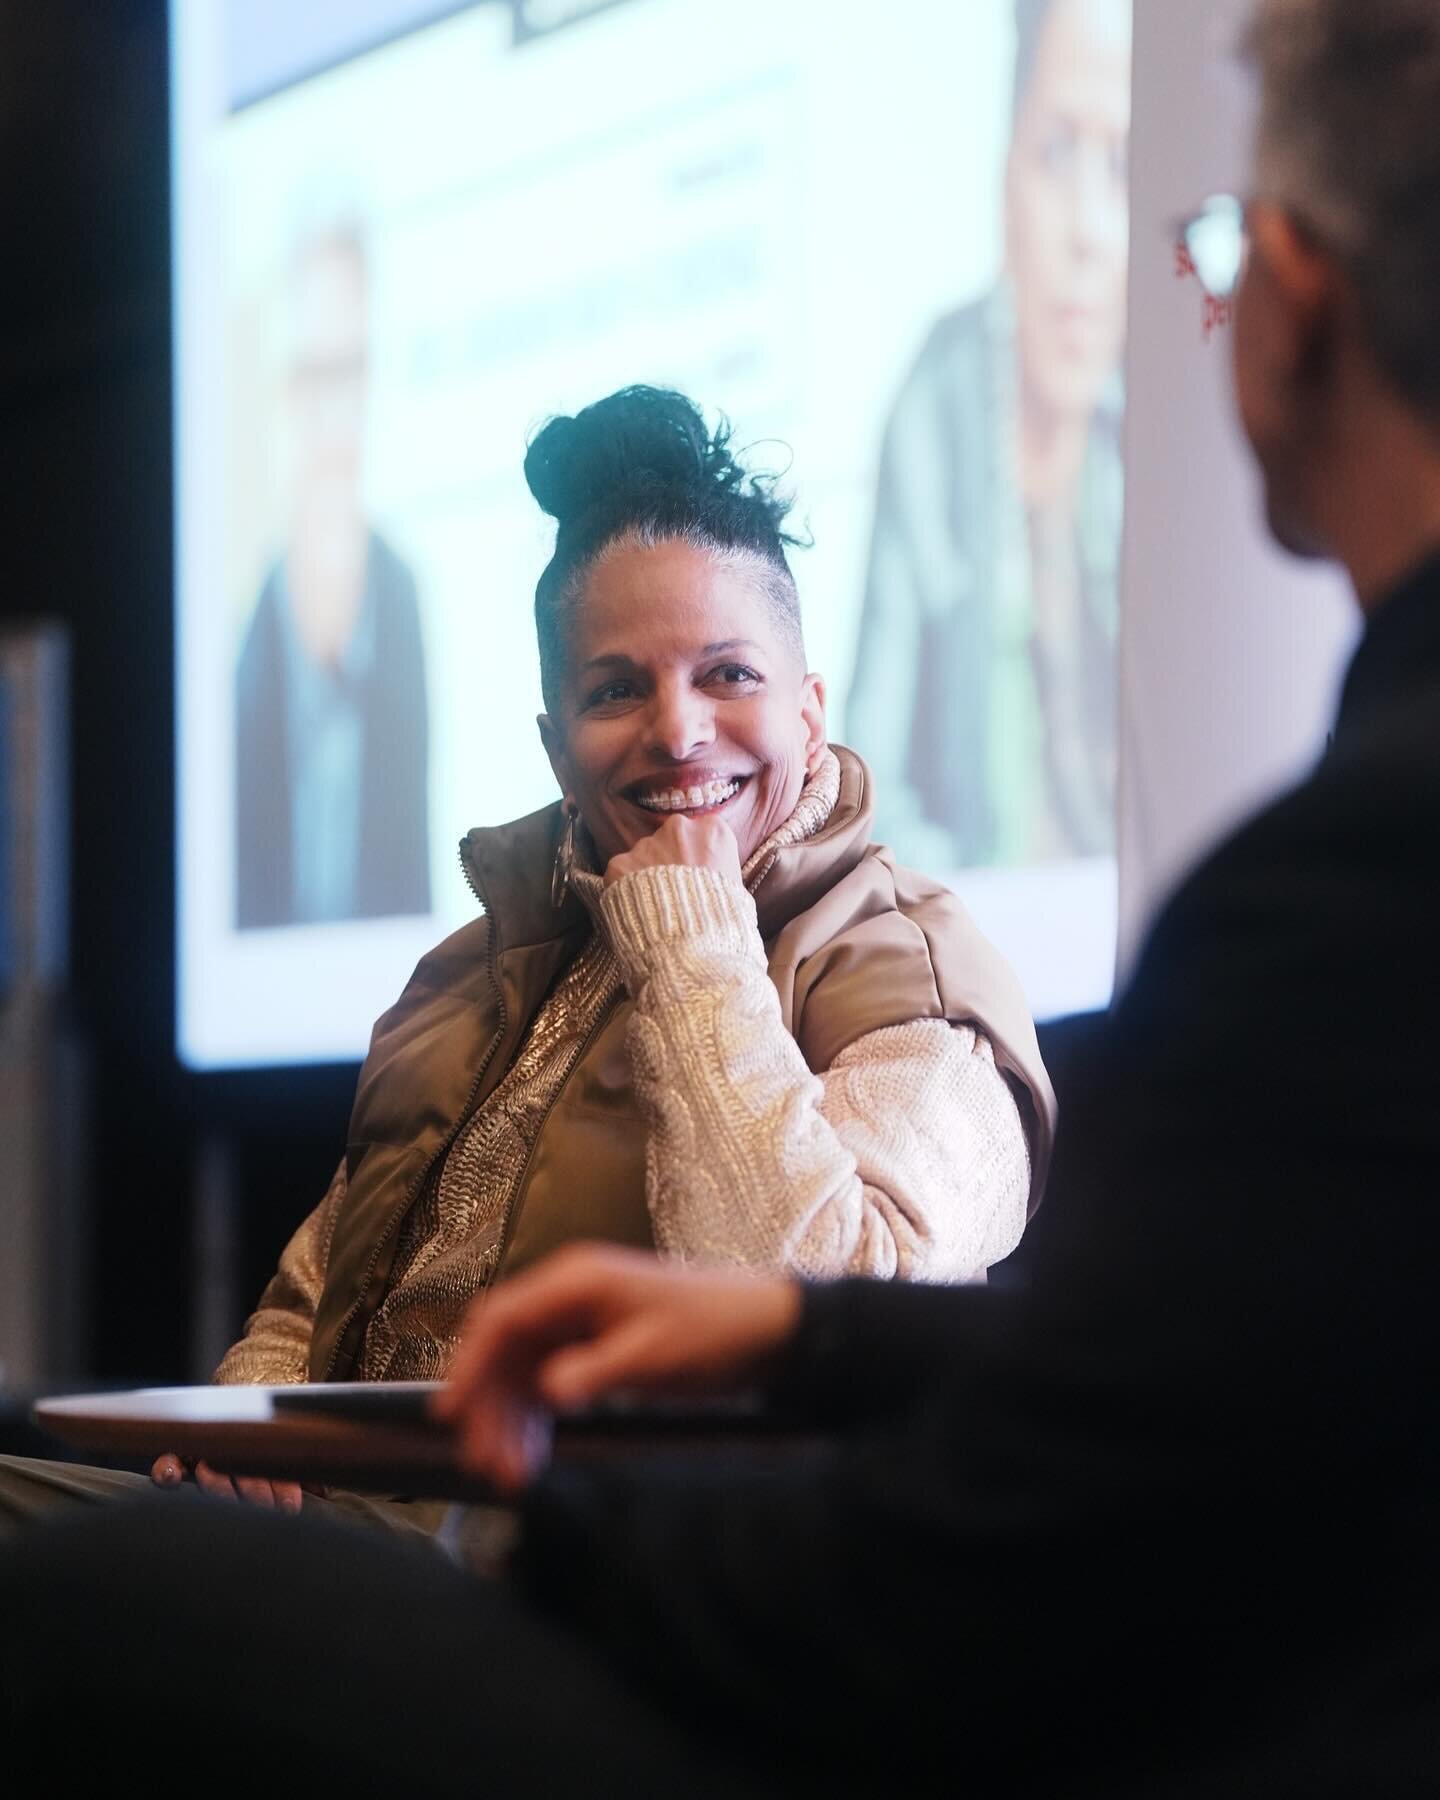 One week ago had a great time talking with Sharon Lewis @thesharonlewis as part of the film Friday Industry Talks at the York University Motion Media Studios. I learned so much about her career, working process and ideas for the future. Some great qu